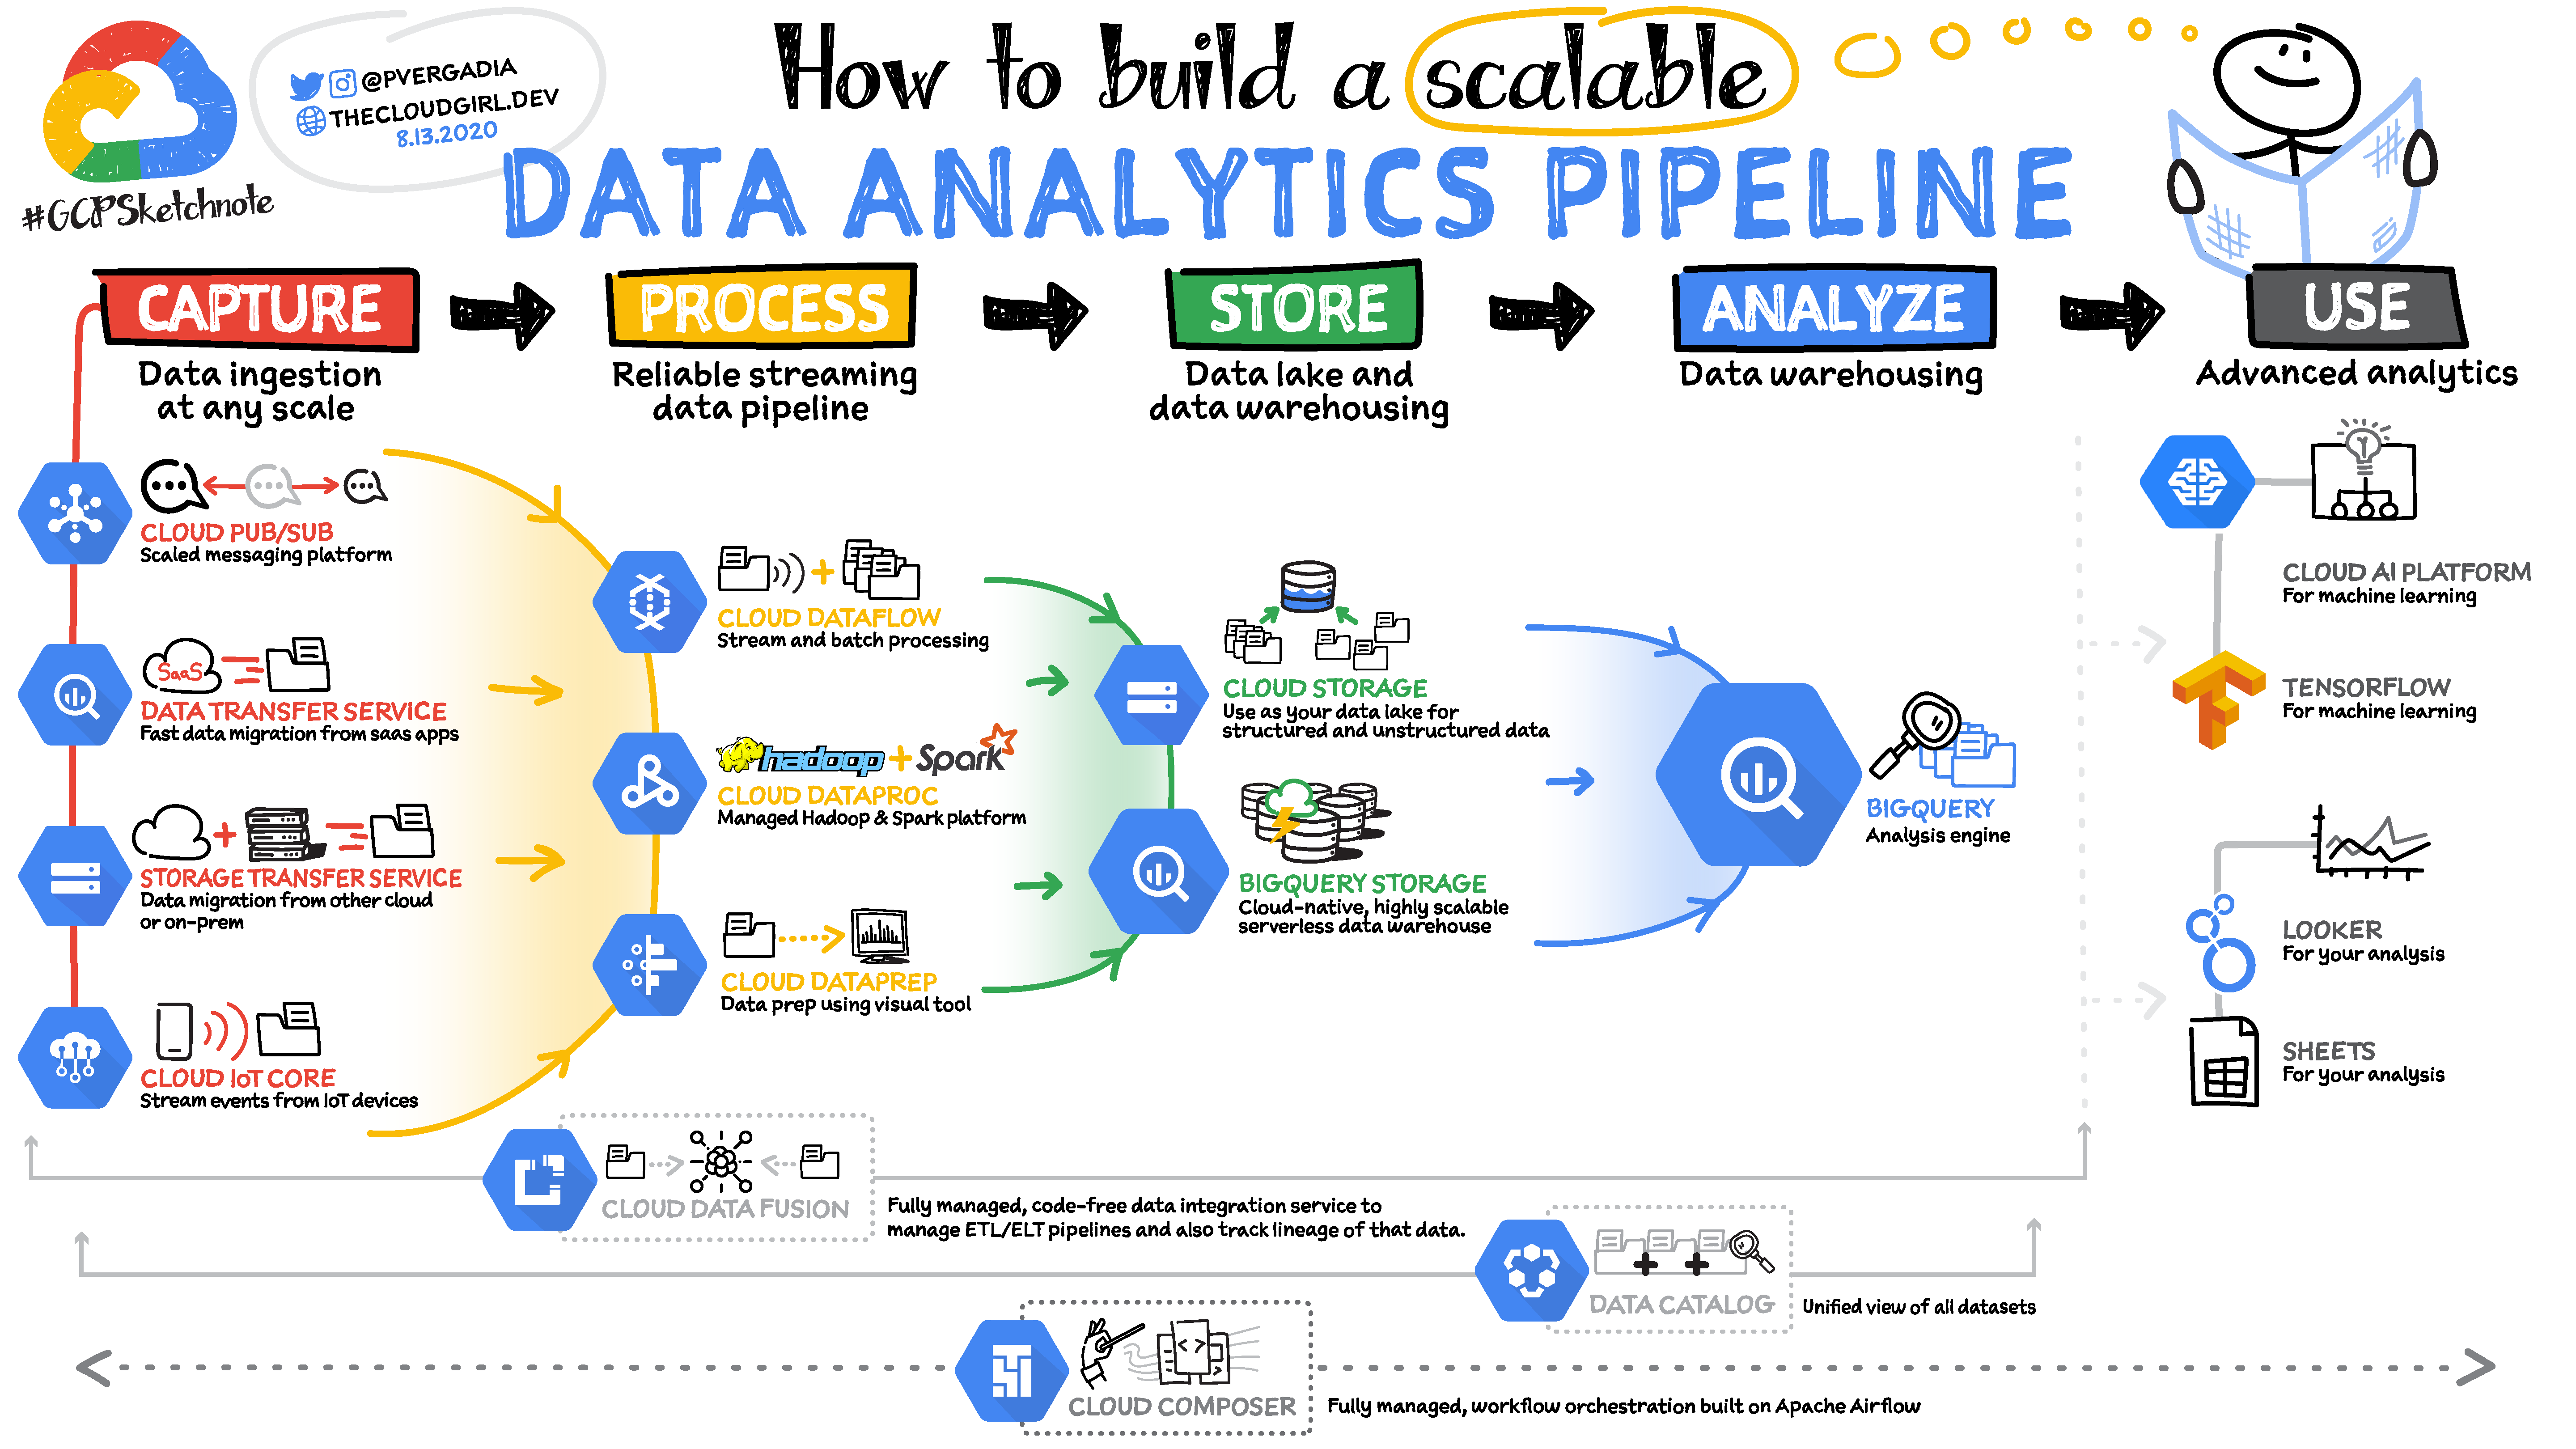 How to Build a Scalable Data Analytics Pipeline